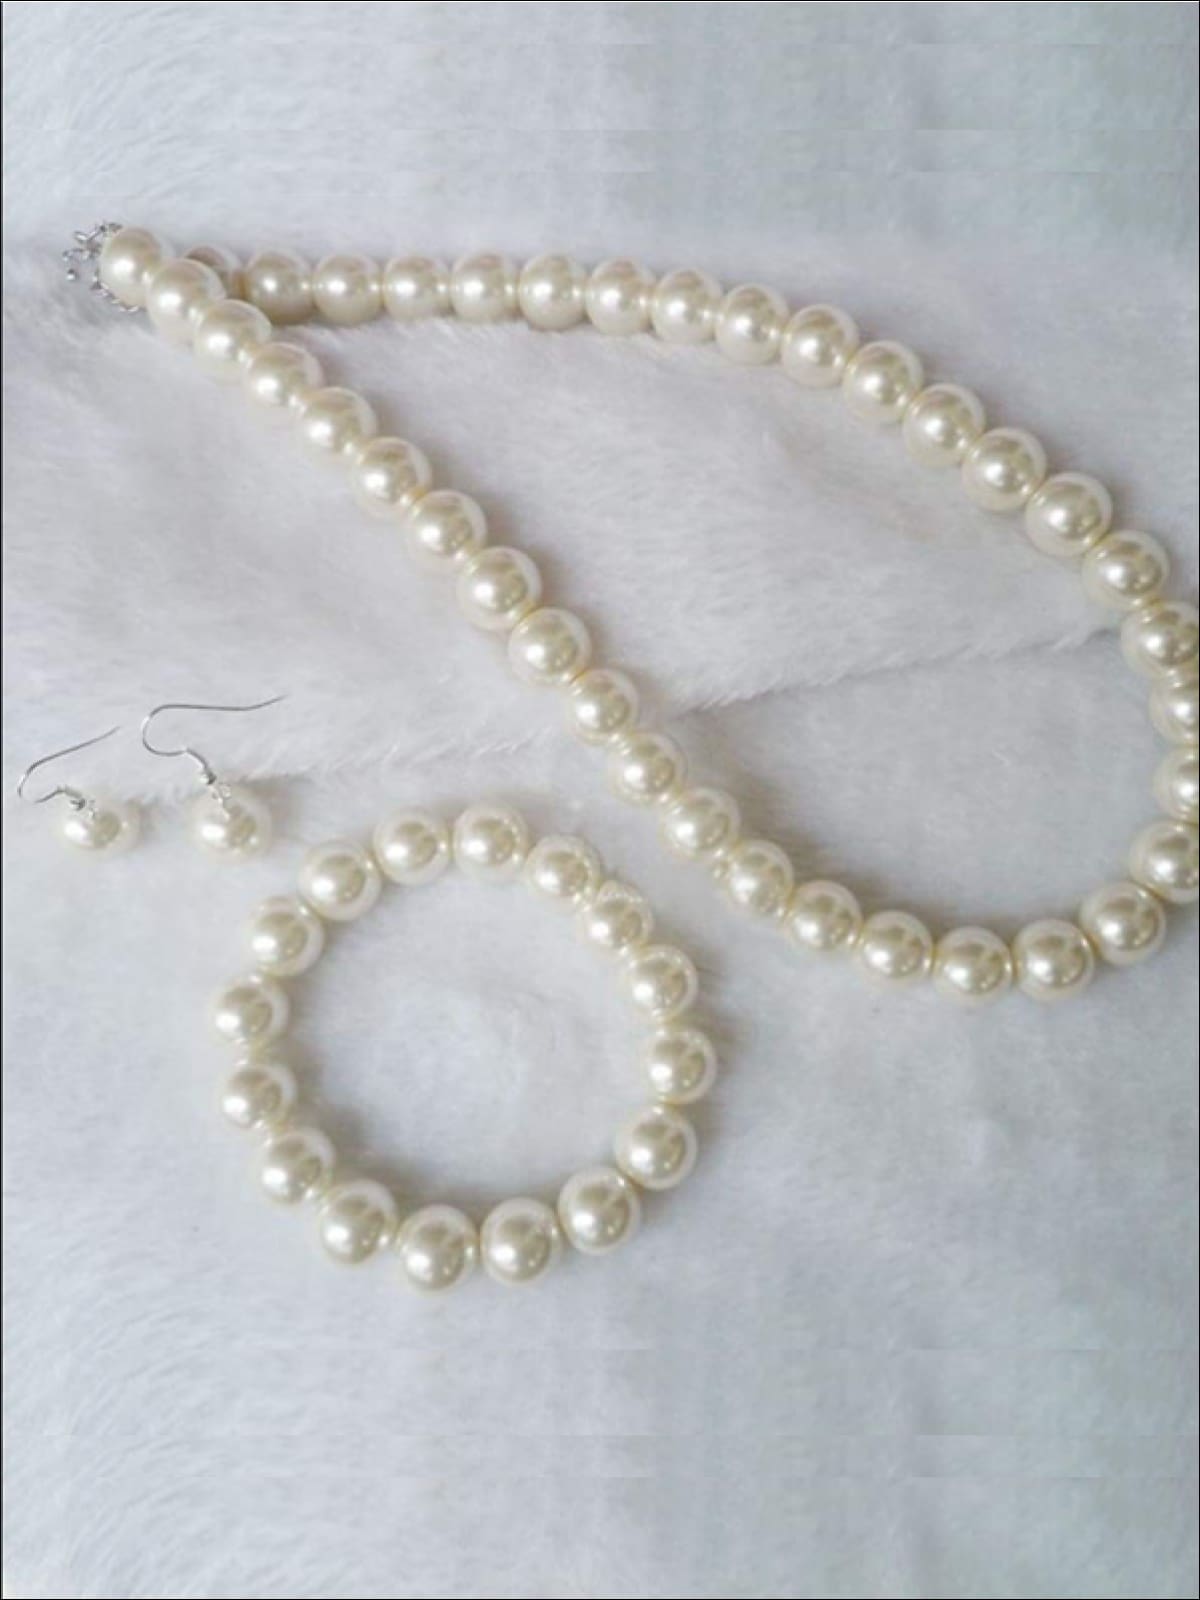 R.H. Macy & Co. Sterling Silver Cultured Pearl Earring & Necklace Set | eBay